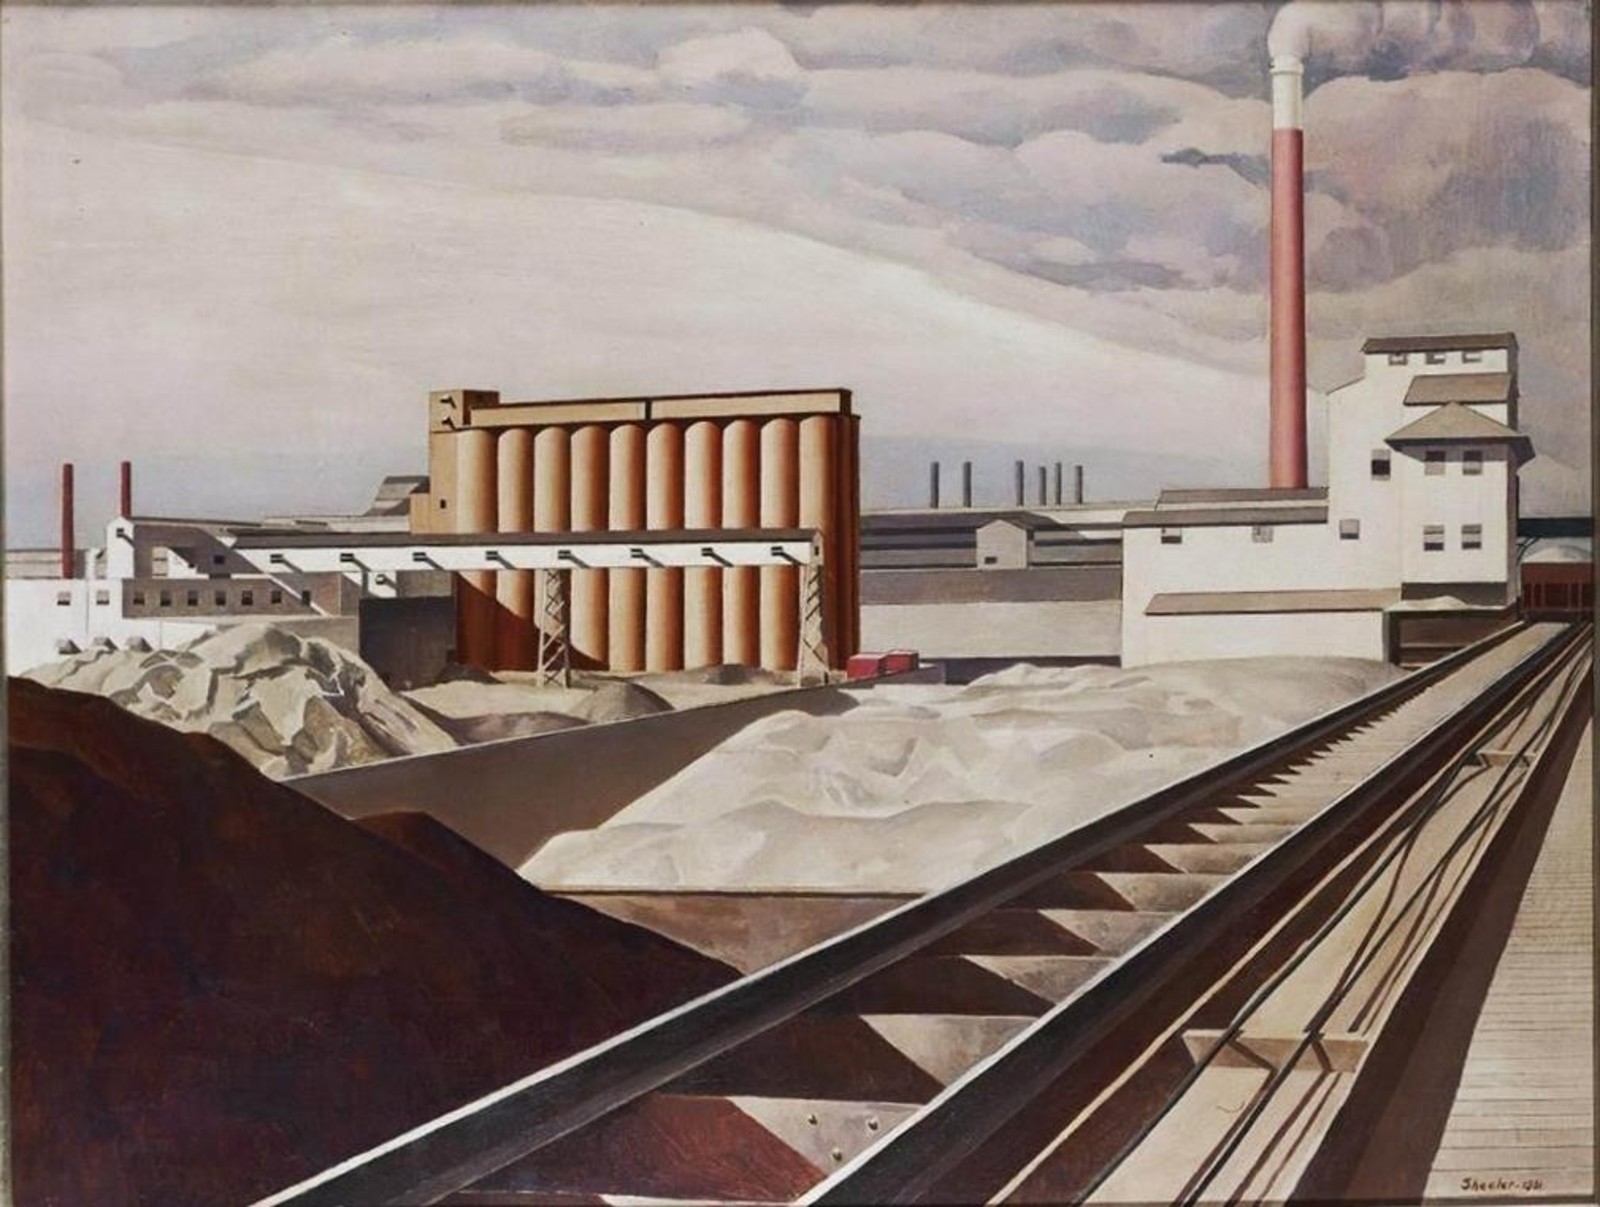 Charles Sheeler. American Landscape. 1930. Oil on canvas. 61 x 78.8 cm. The Museum of Modern Art (New York City, United States).